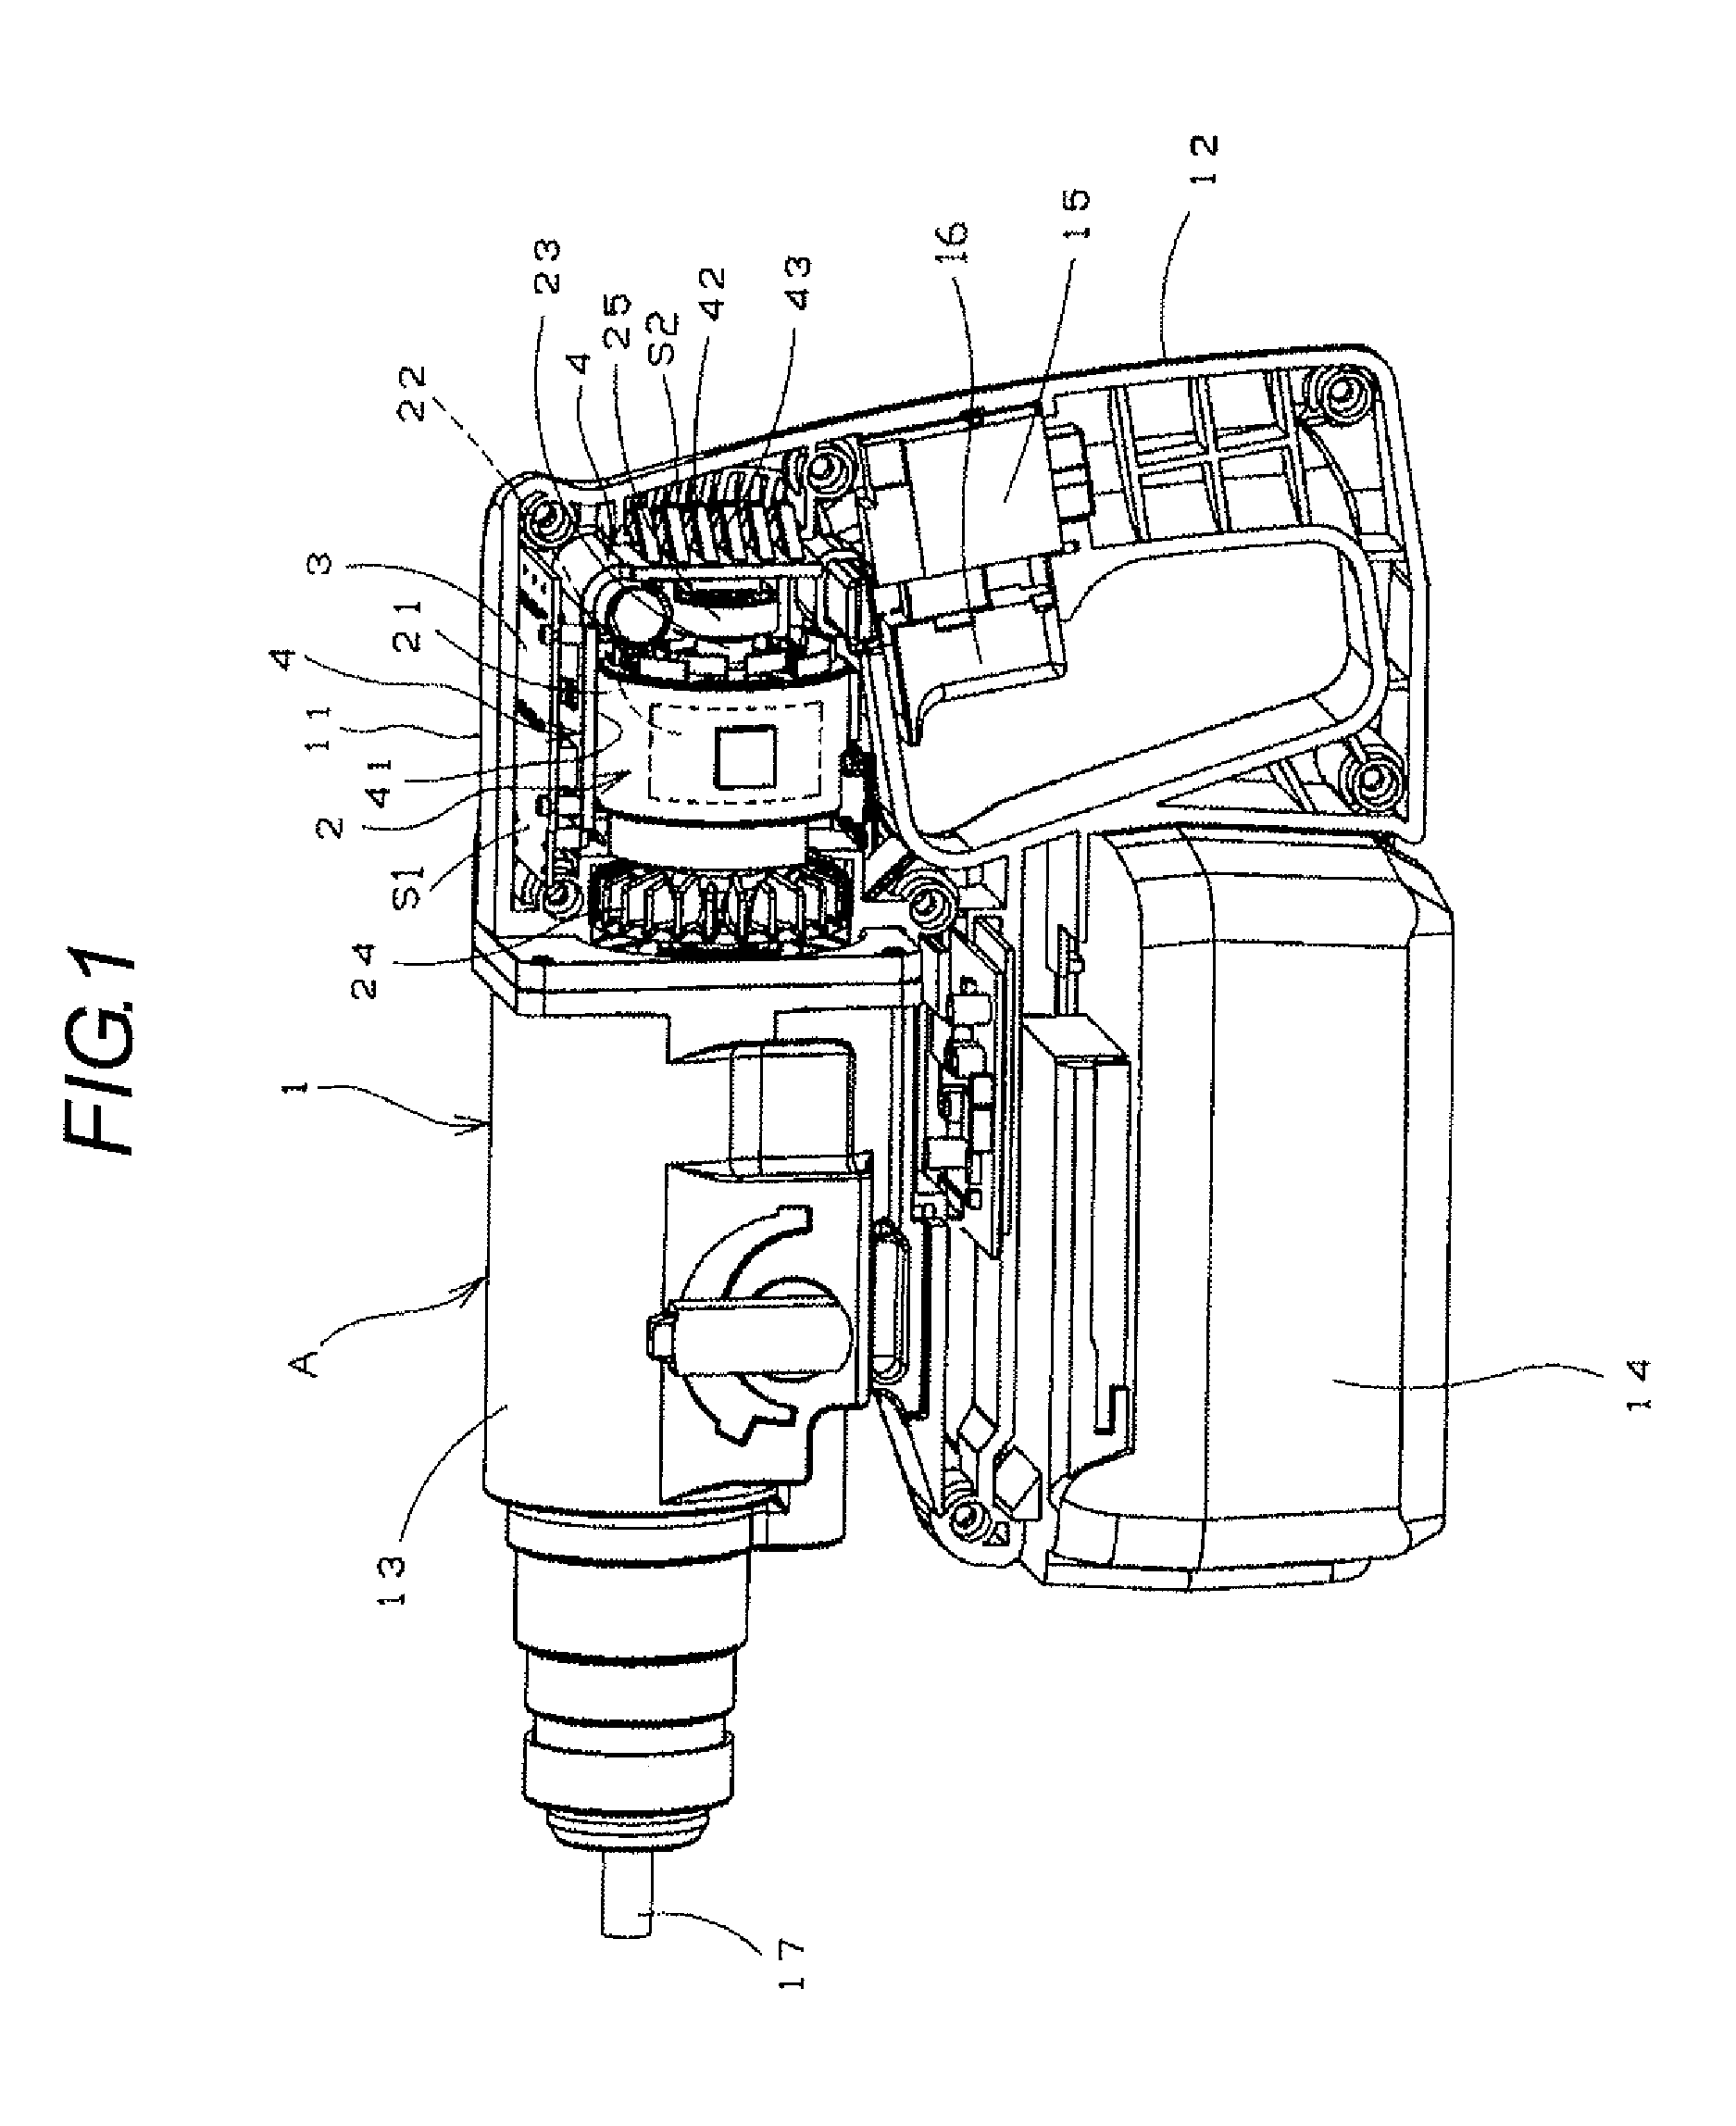 Power tool with brushless motor